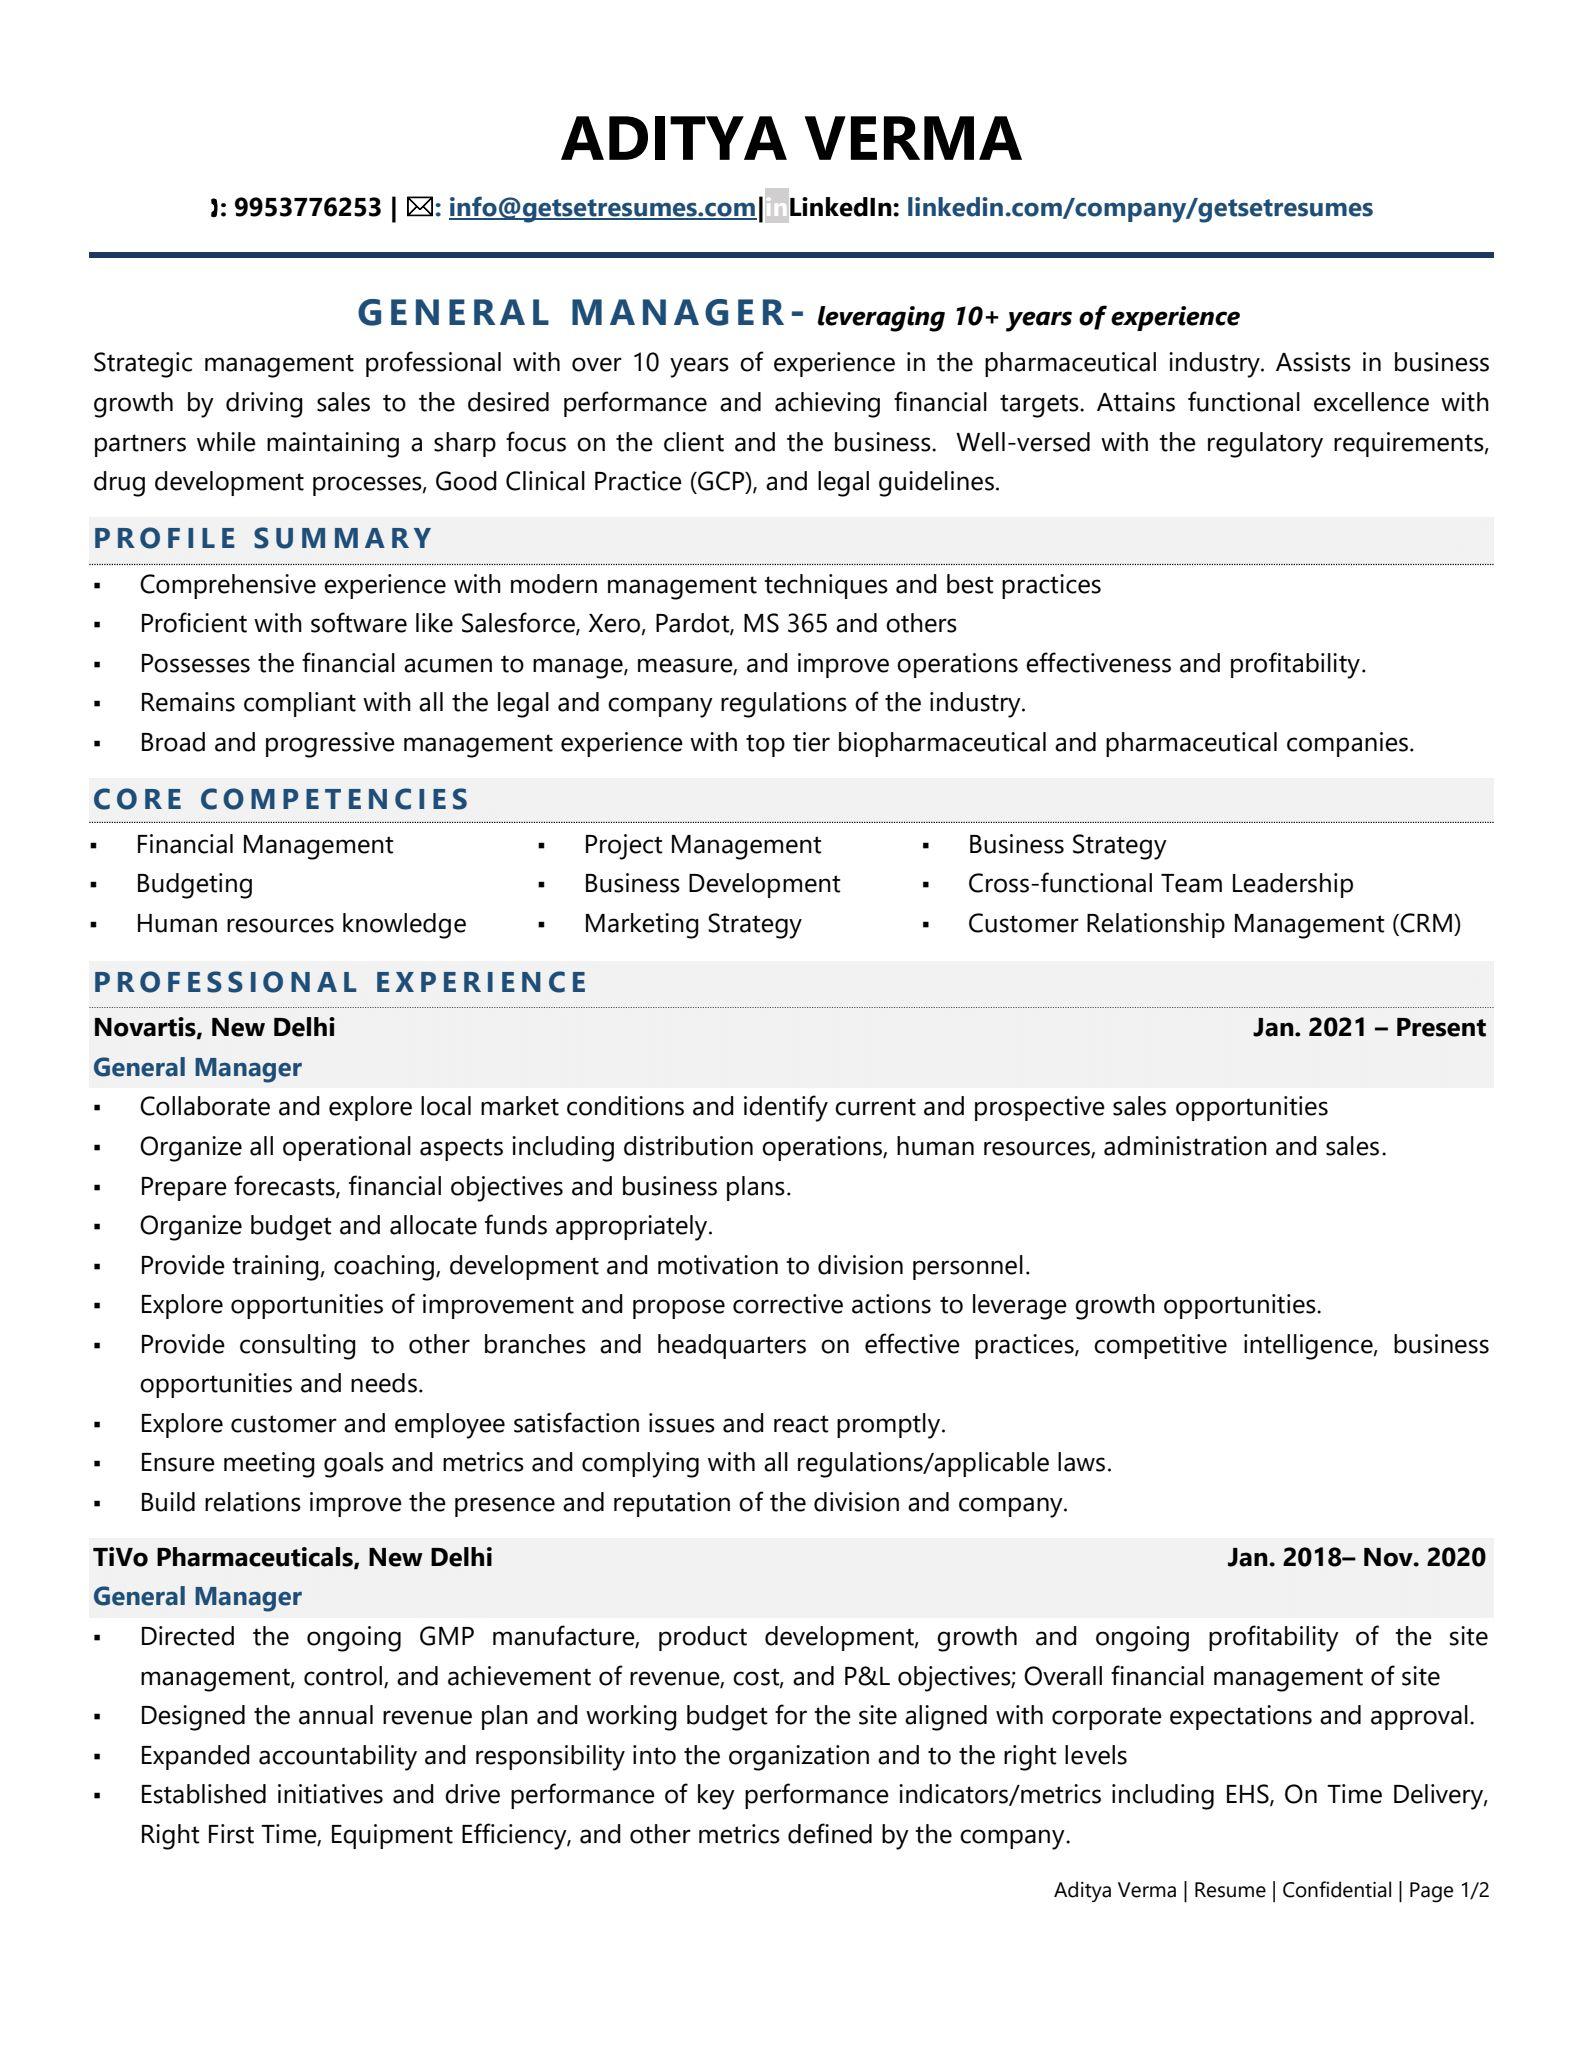 General Manager – Sales & Marketing - Resume Example & Template